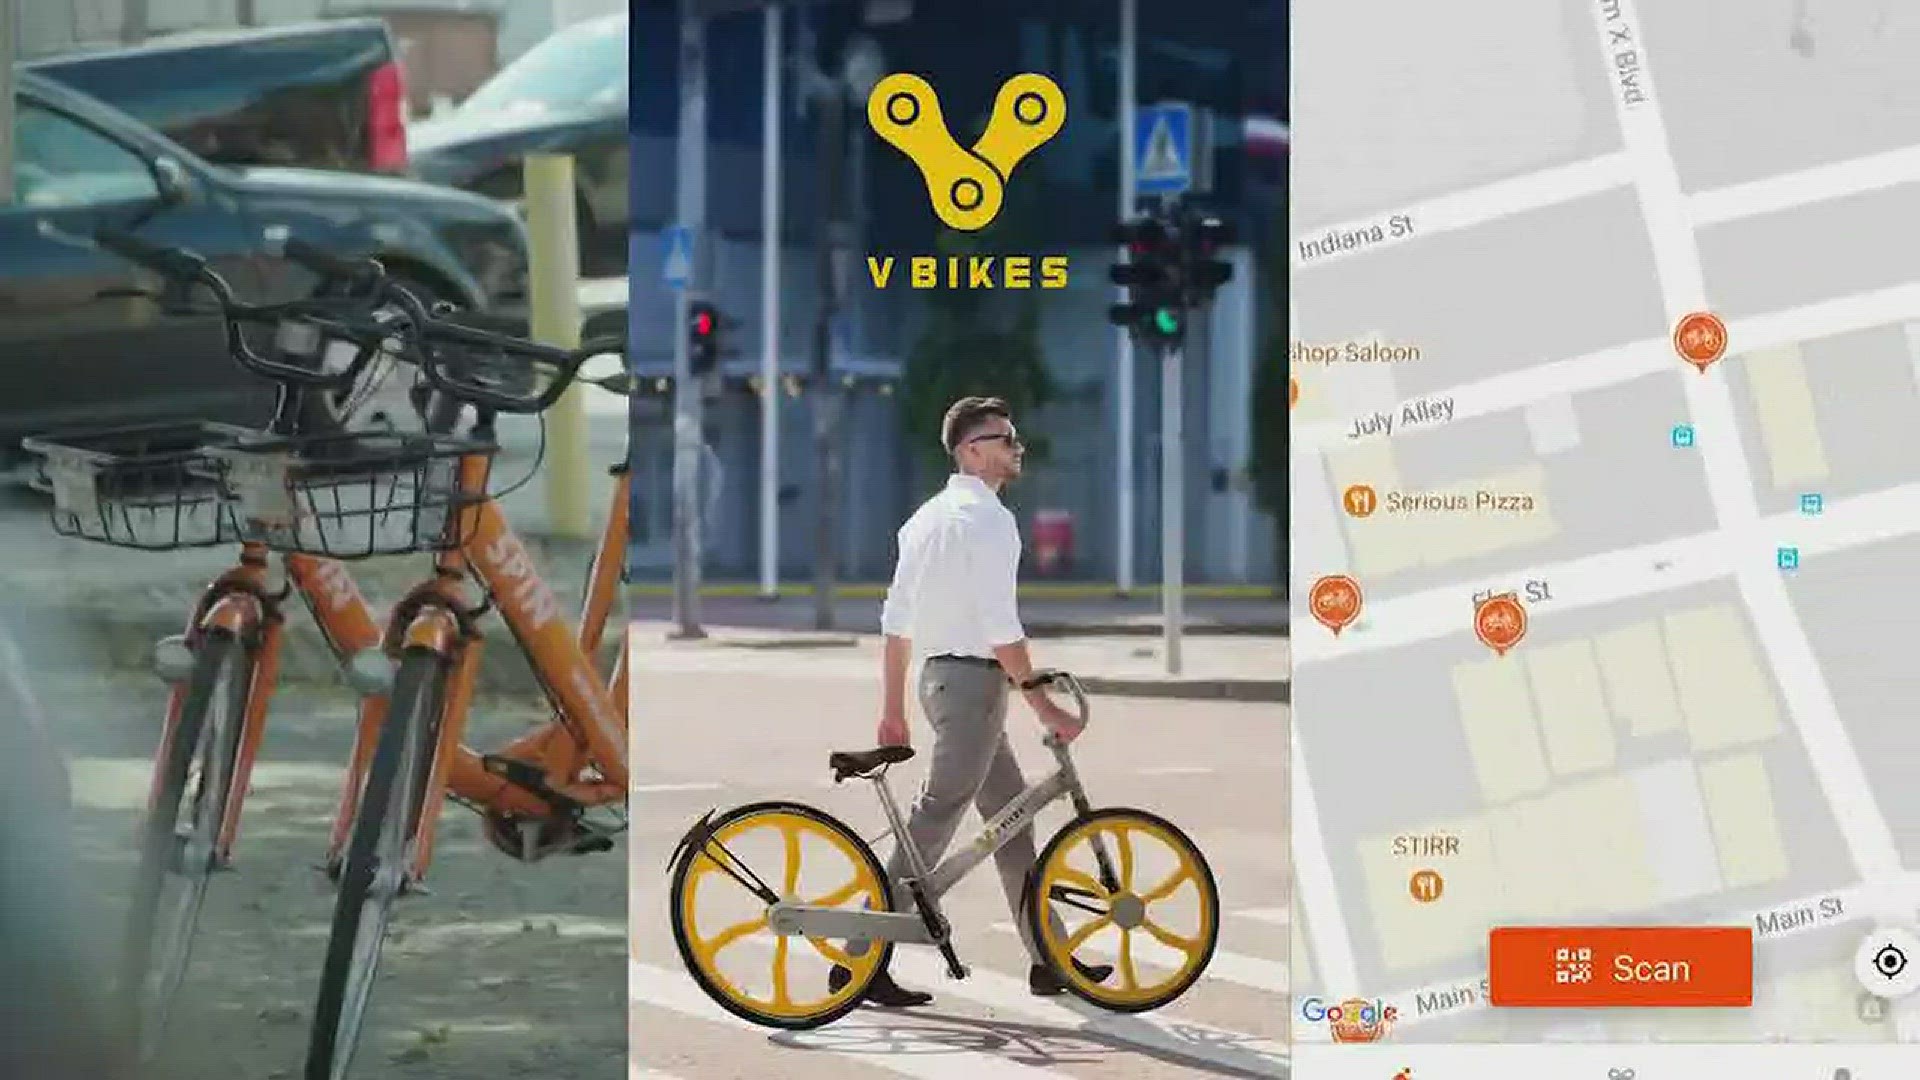 Verify: We answer your questions about bike sharing